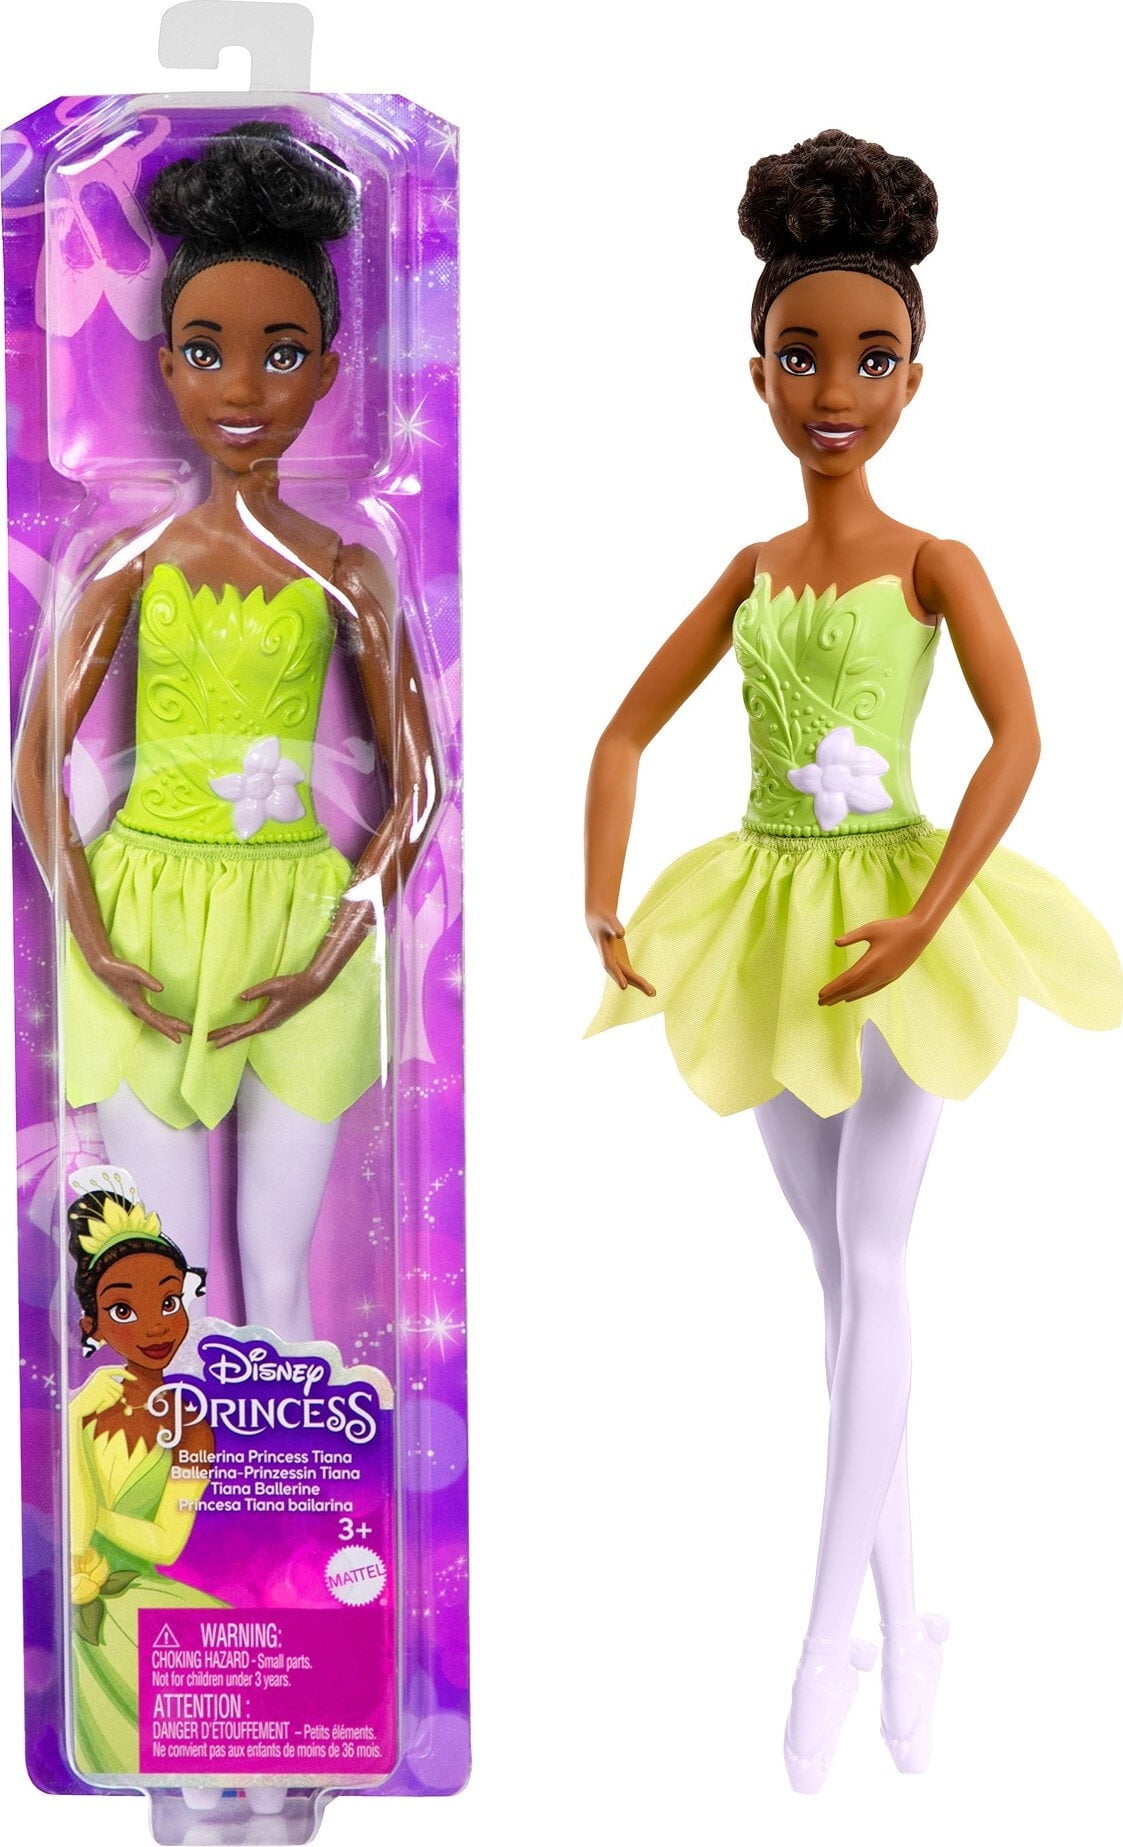 Disney Princess Ballerina Tiana Fashion Doll with Posable Arms and Legs 